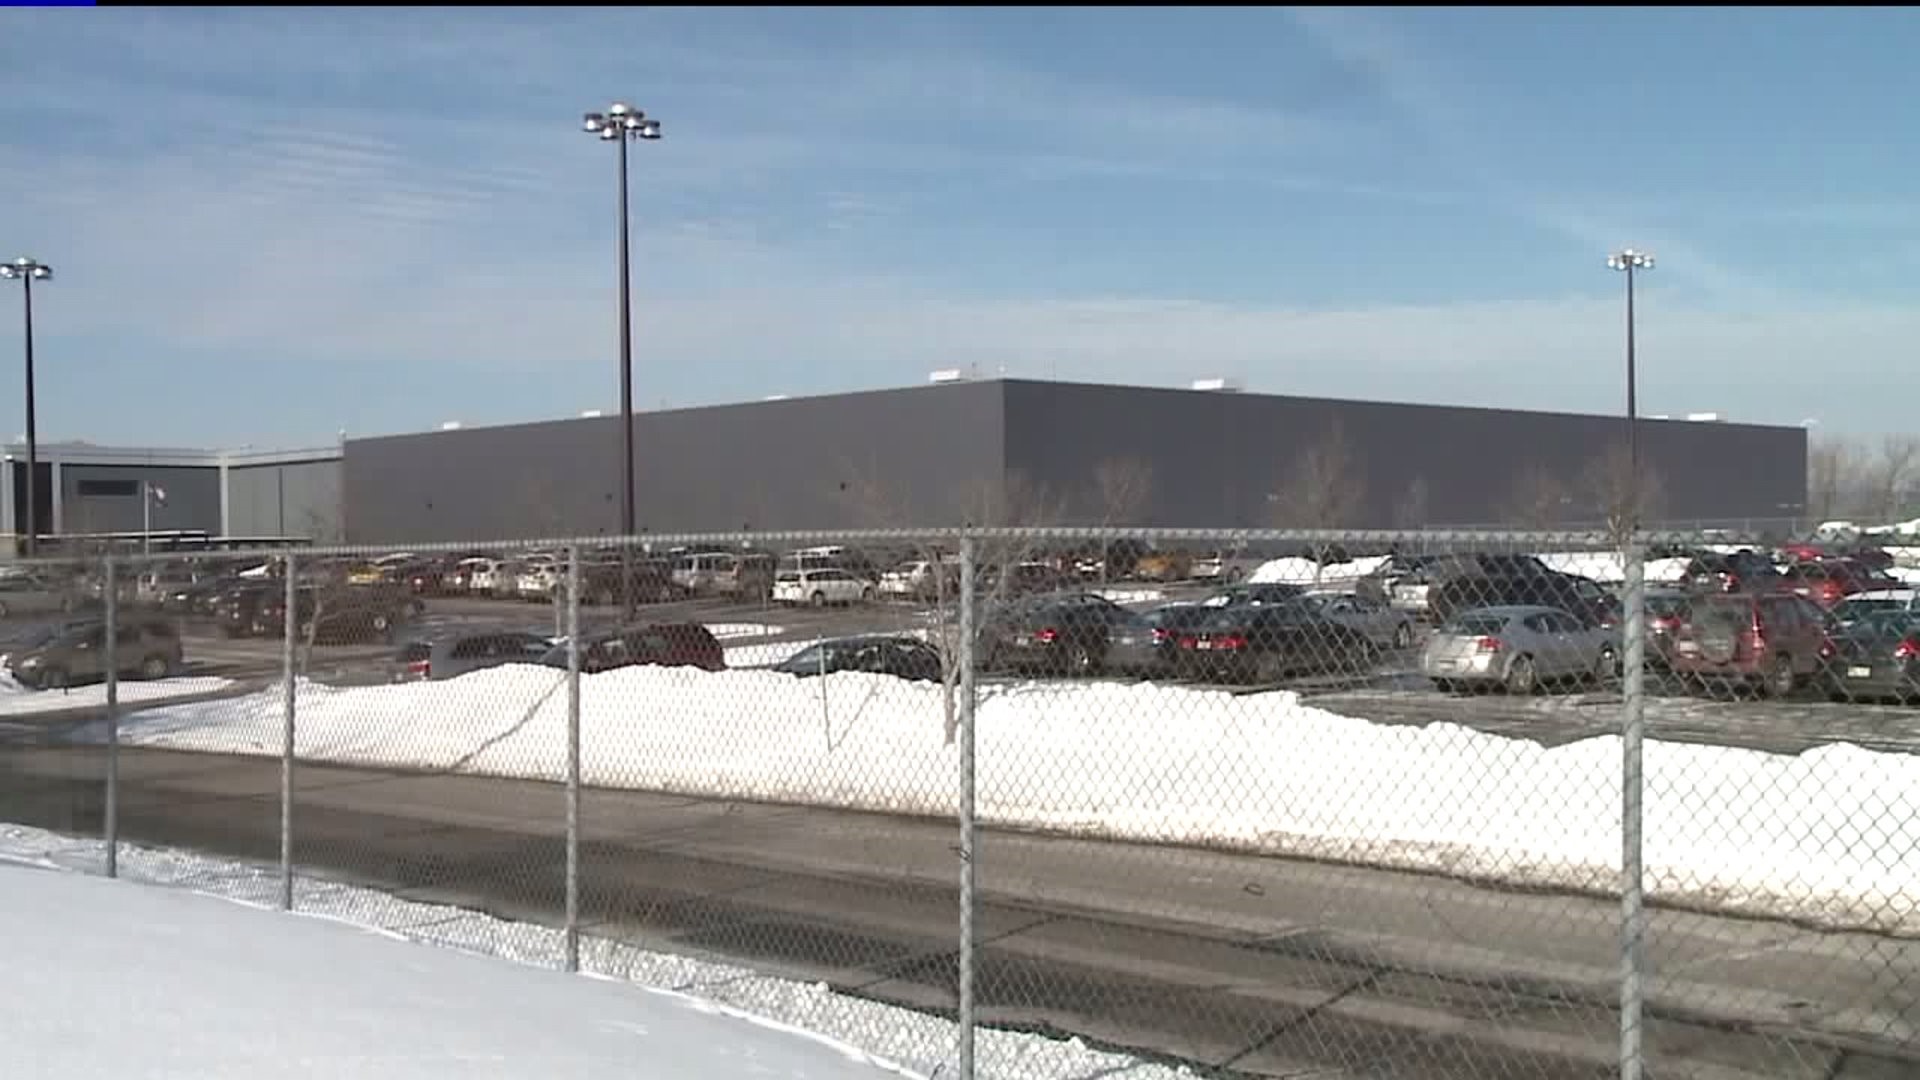 Confusion over Lord and Taylor Closure in Luzerne County